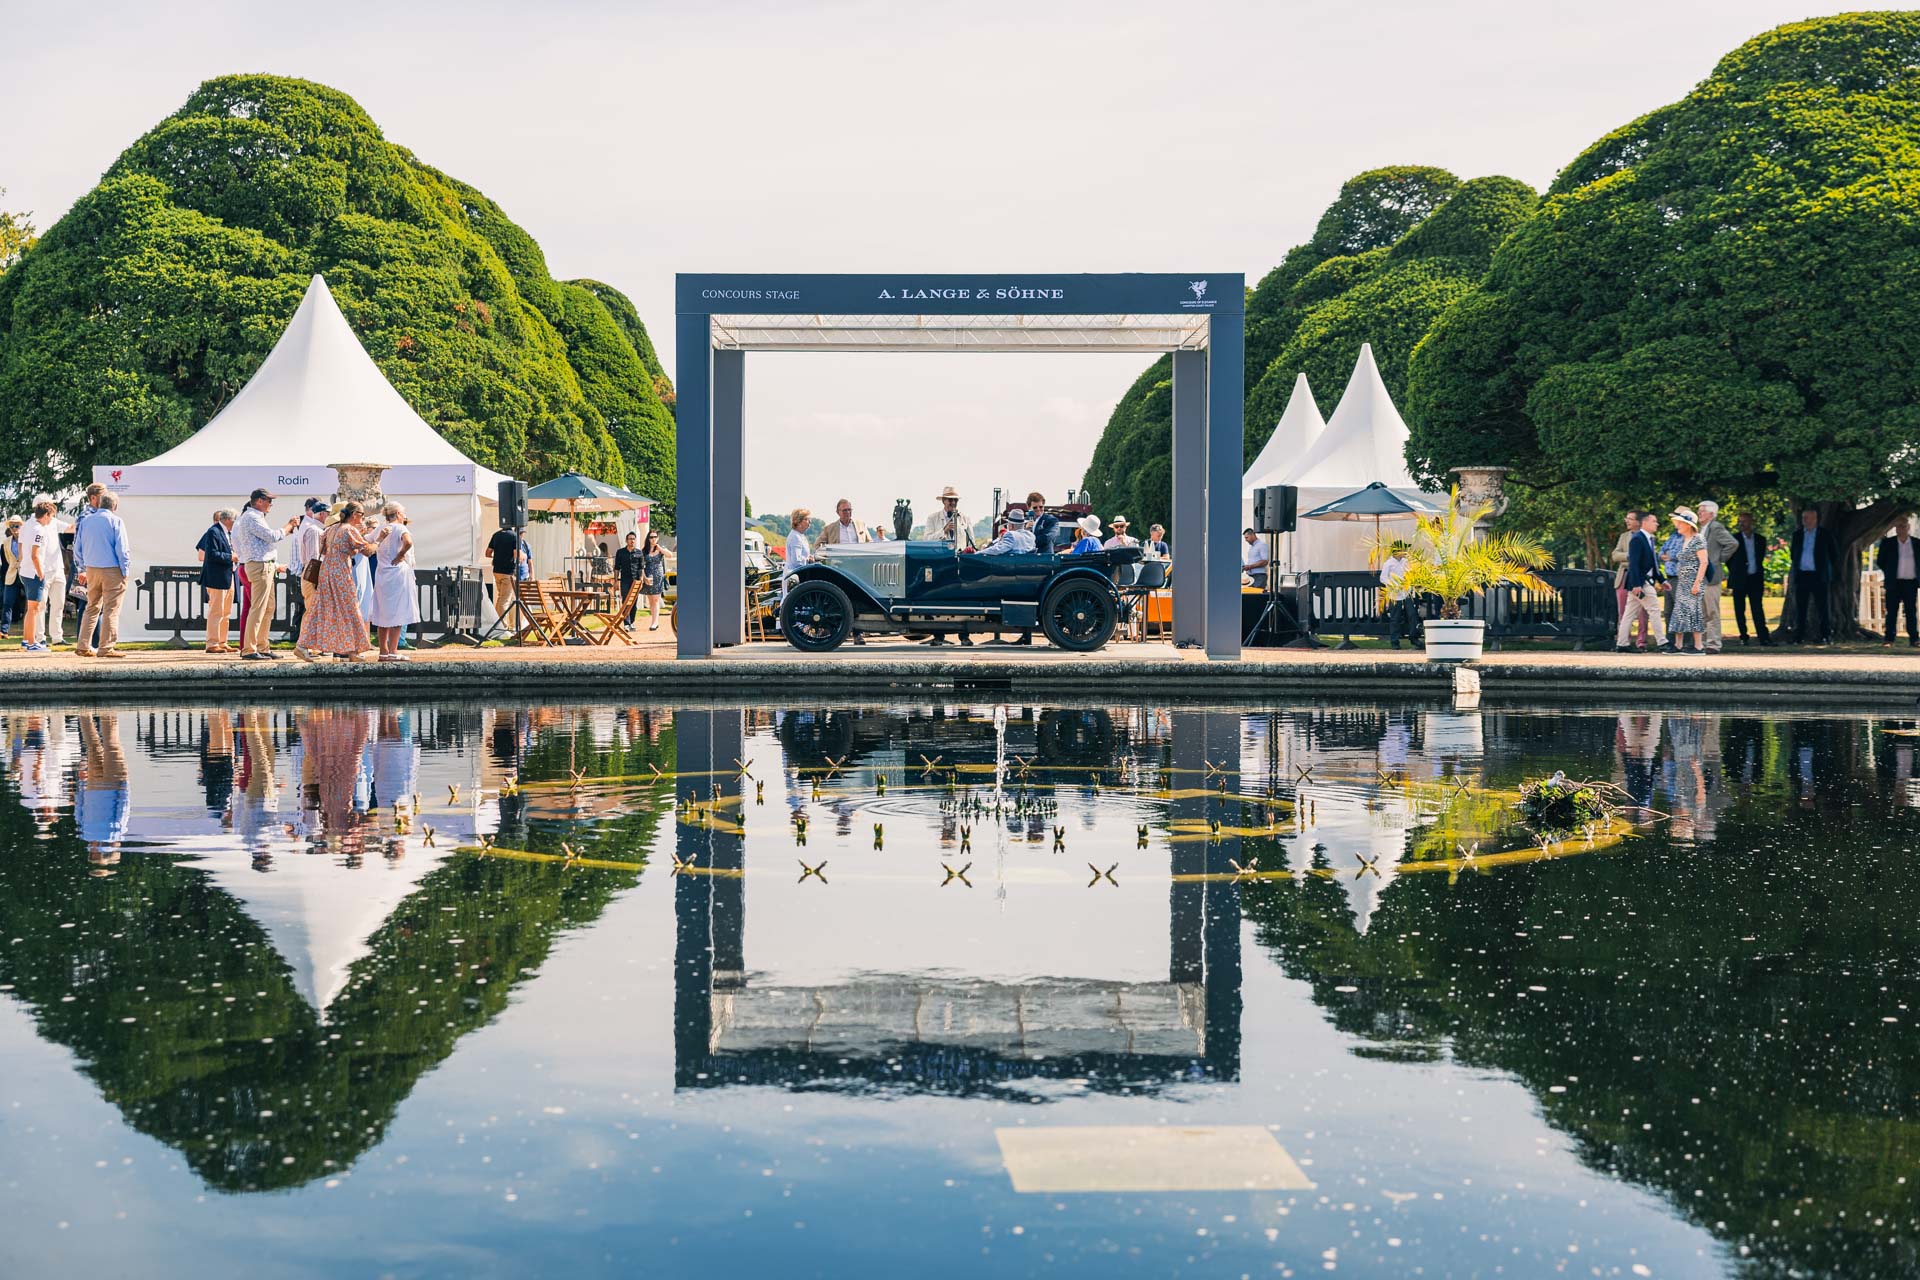 Concours of Elegance Stage